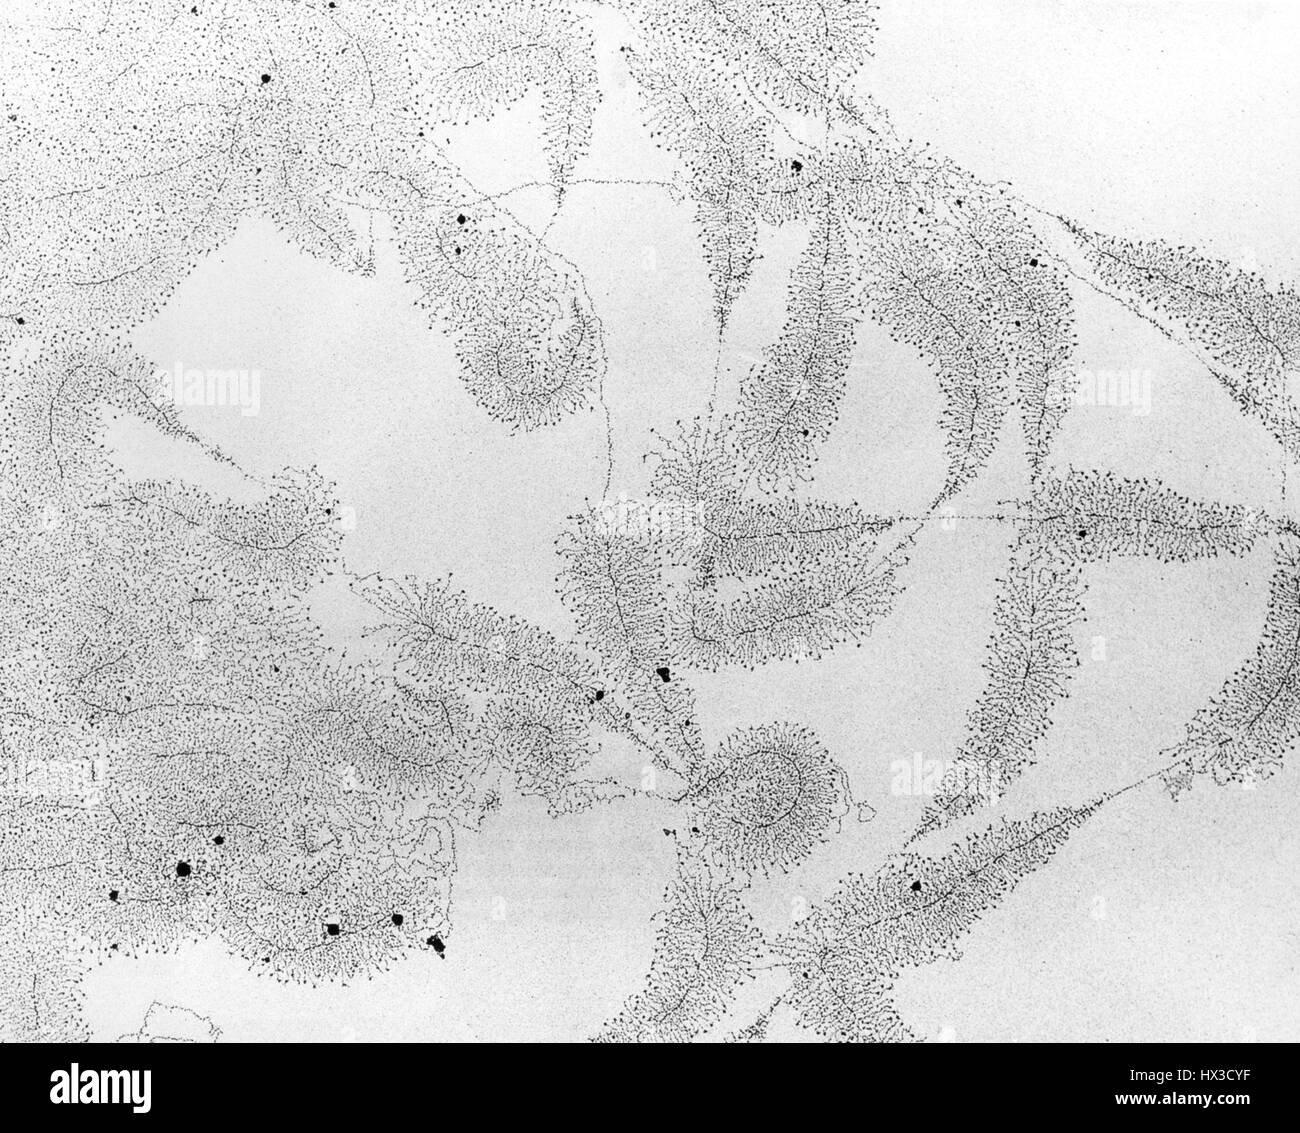 Historic electron microscope photograph of functioning genes shown about 25, 000 times actual size, 1969. Image courtesy US Department of Energy. Stock Photo